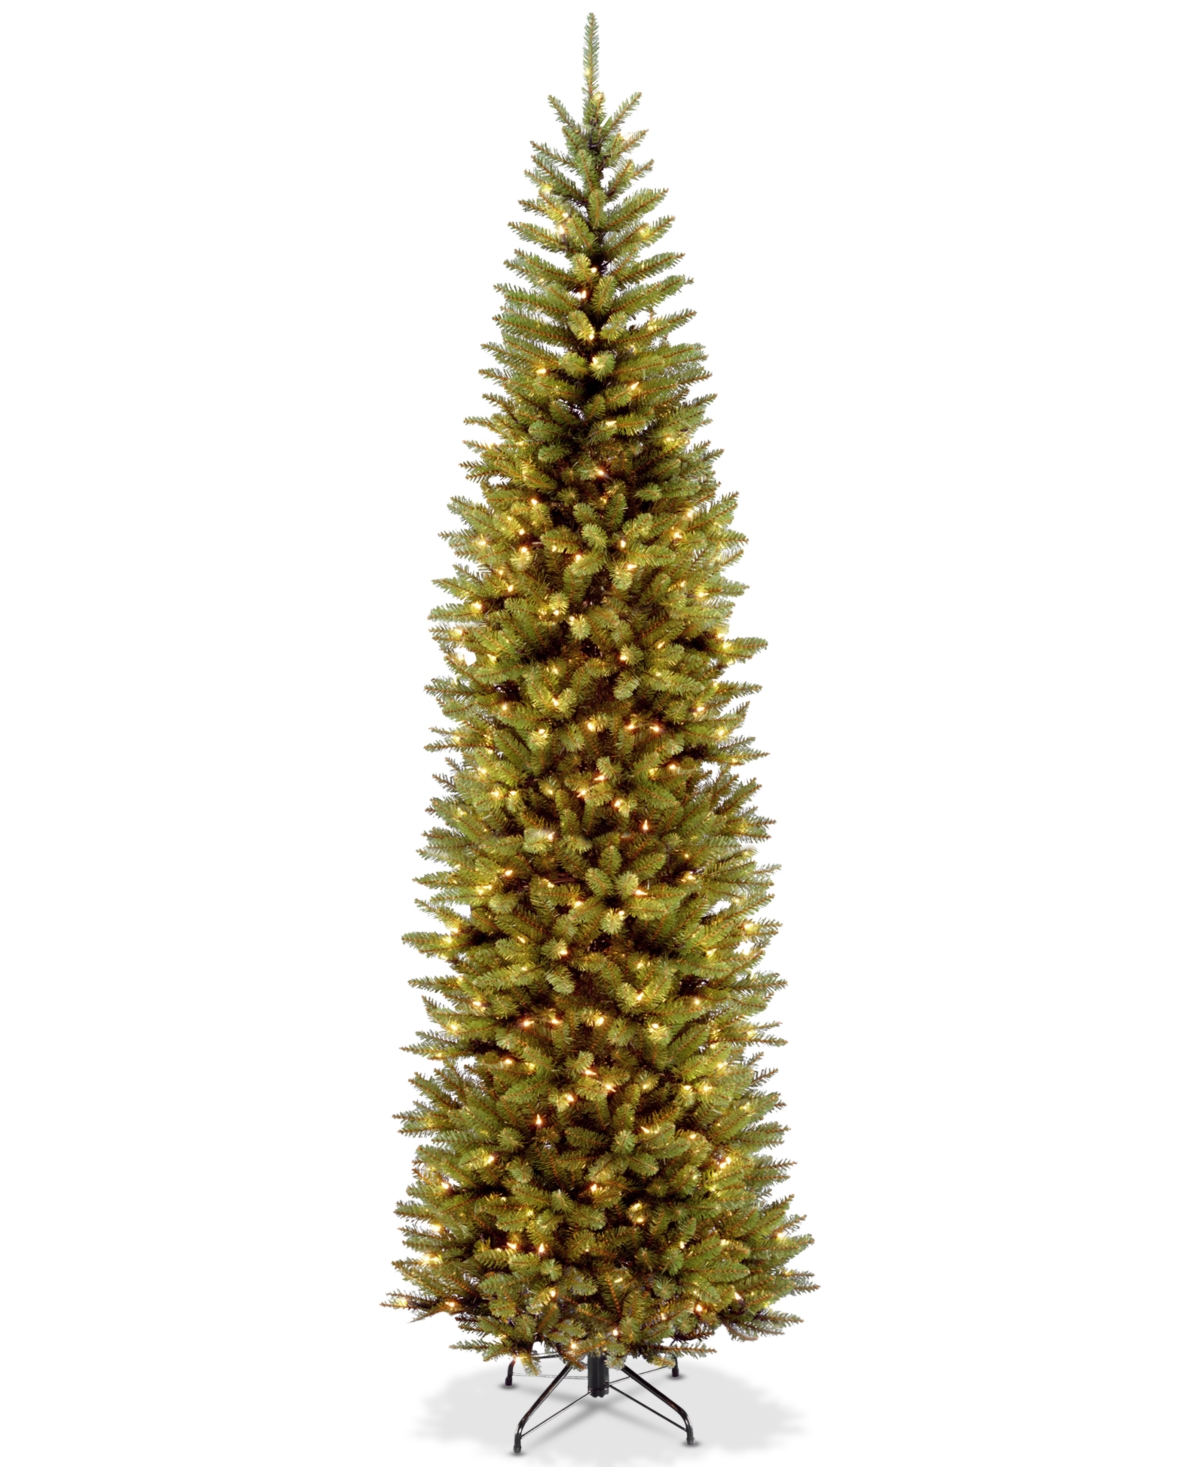 10' Kingswood Fir Pencil Tree With 600 Clear Lights - Green